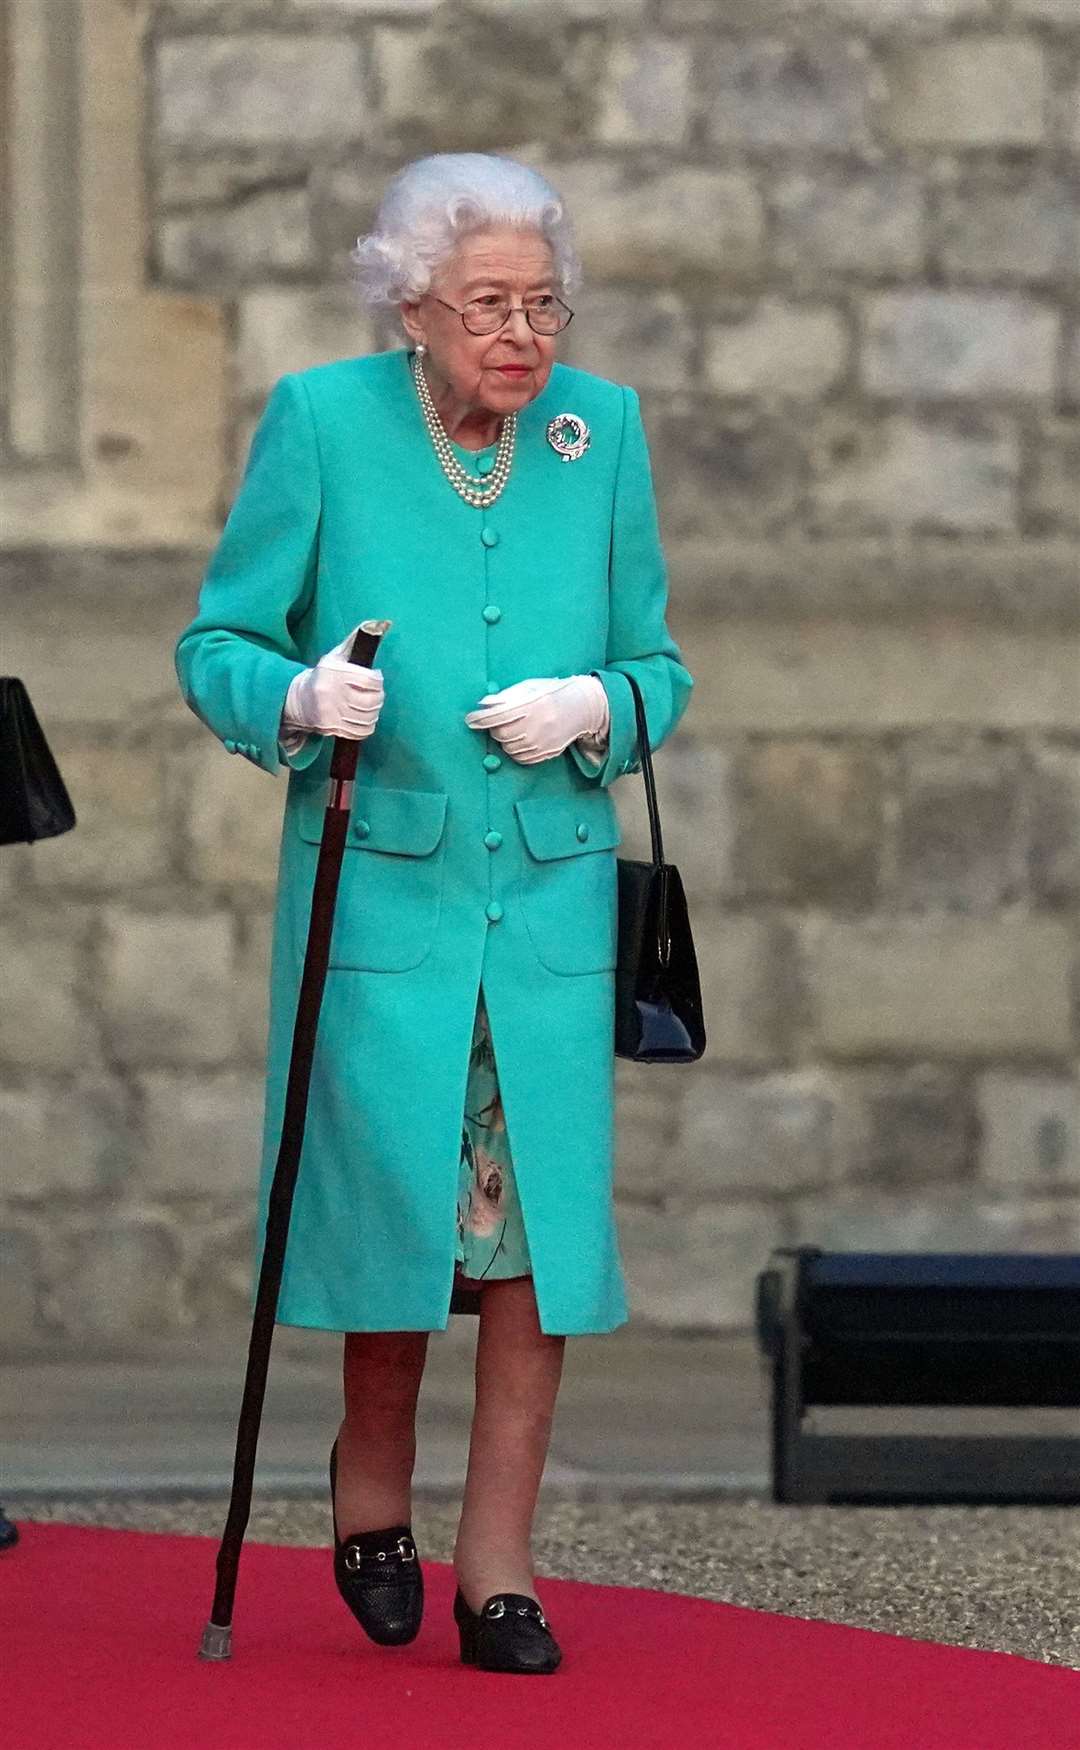 The Queen arrives to symbolically lead the lighting of the principal jubilee beacon at Windsor Castle (Steve Parsons/PA)